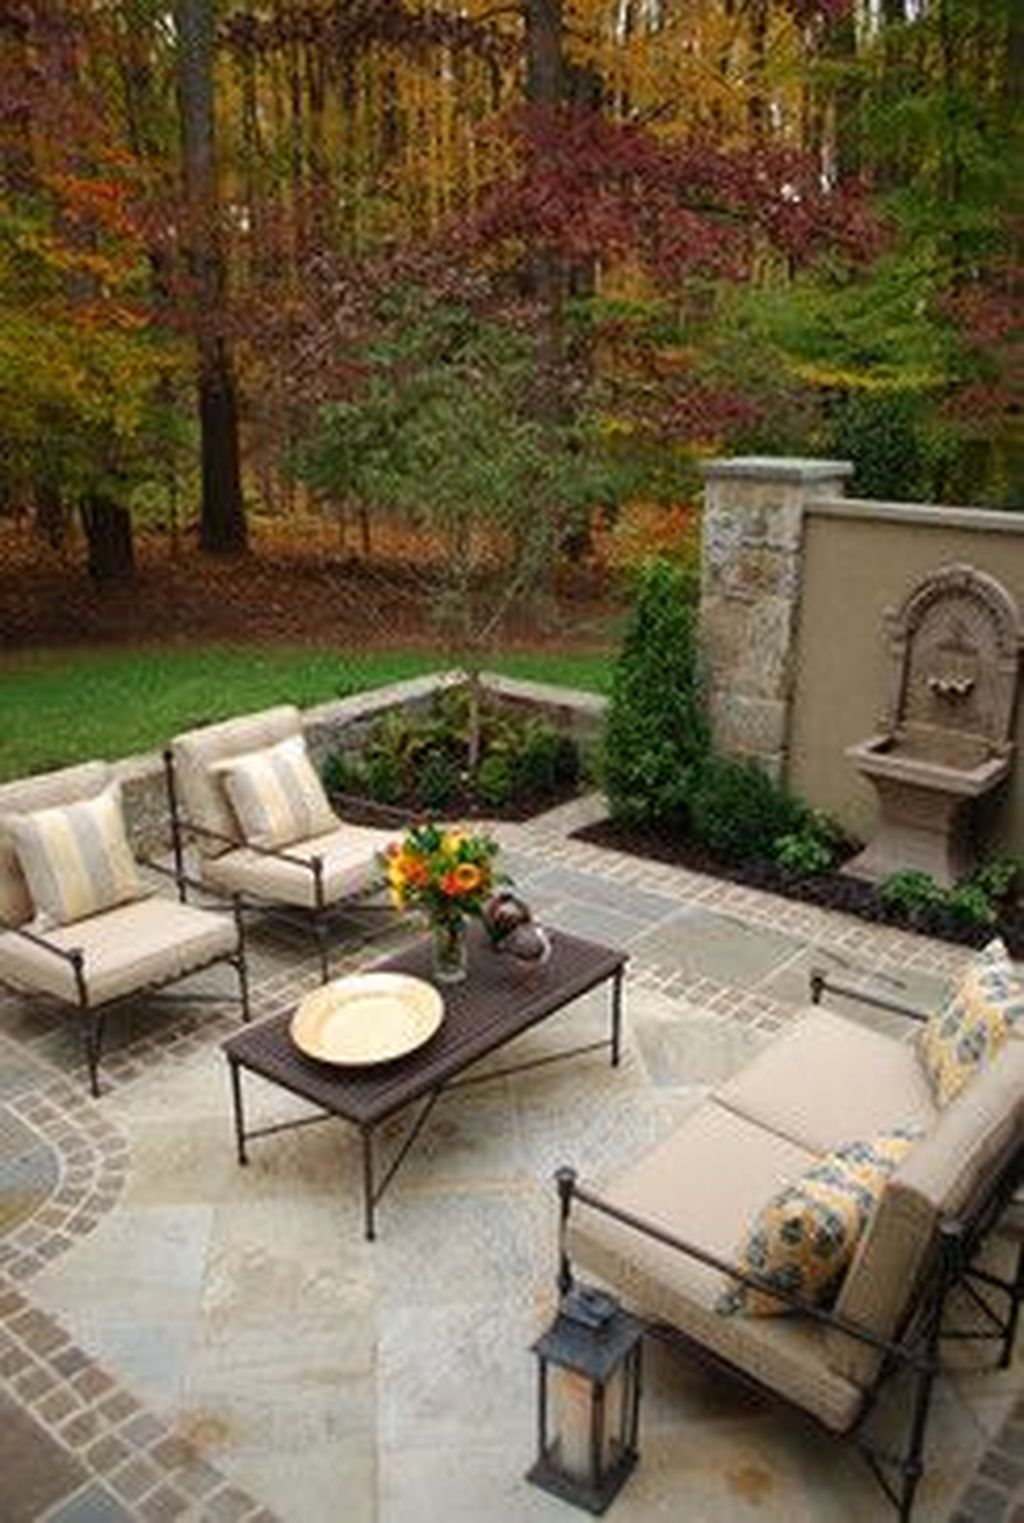 45 Outstanding Patio Yard Furniture Ideas For Fall To Try - BESTHOMISH